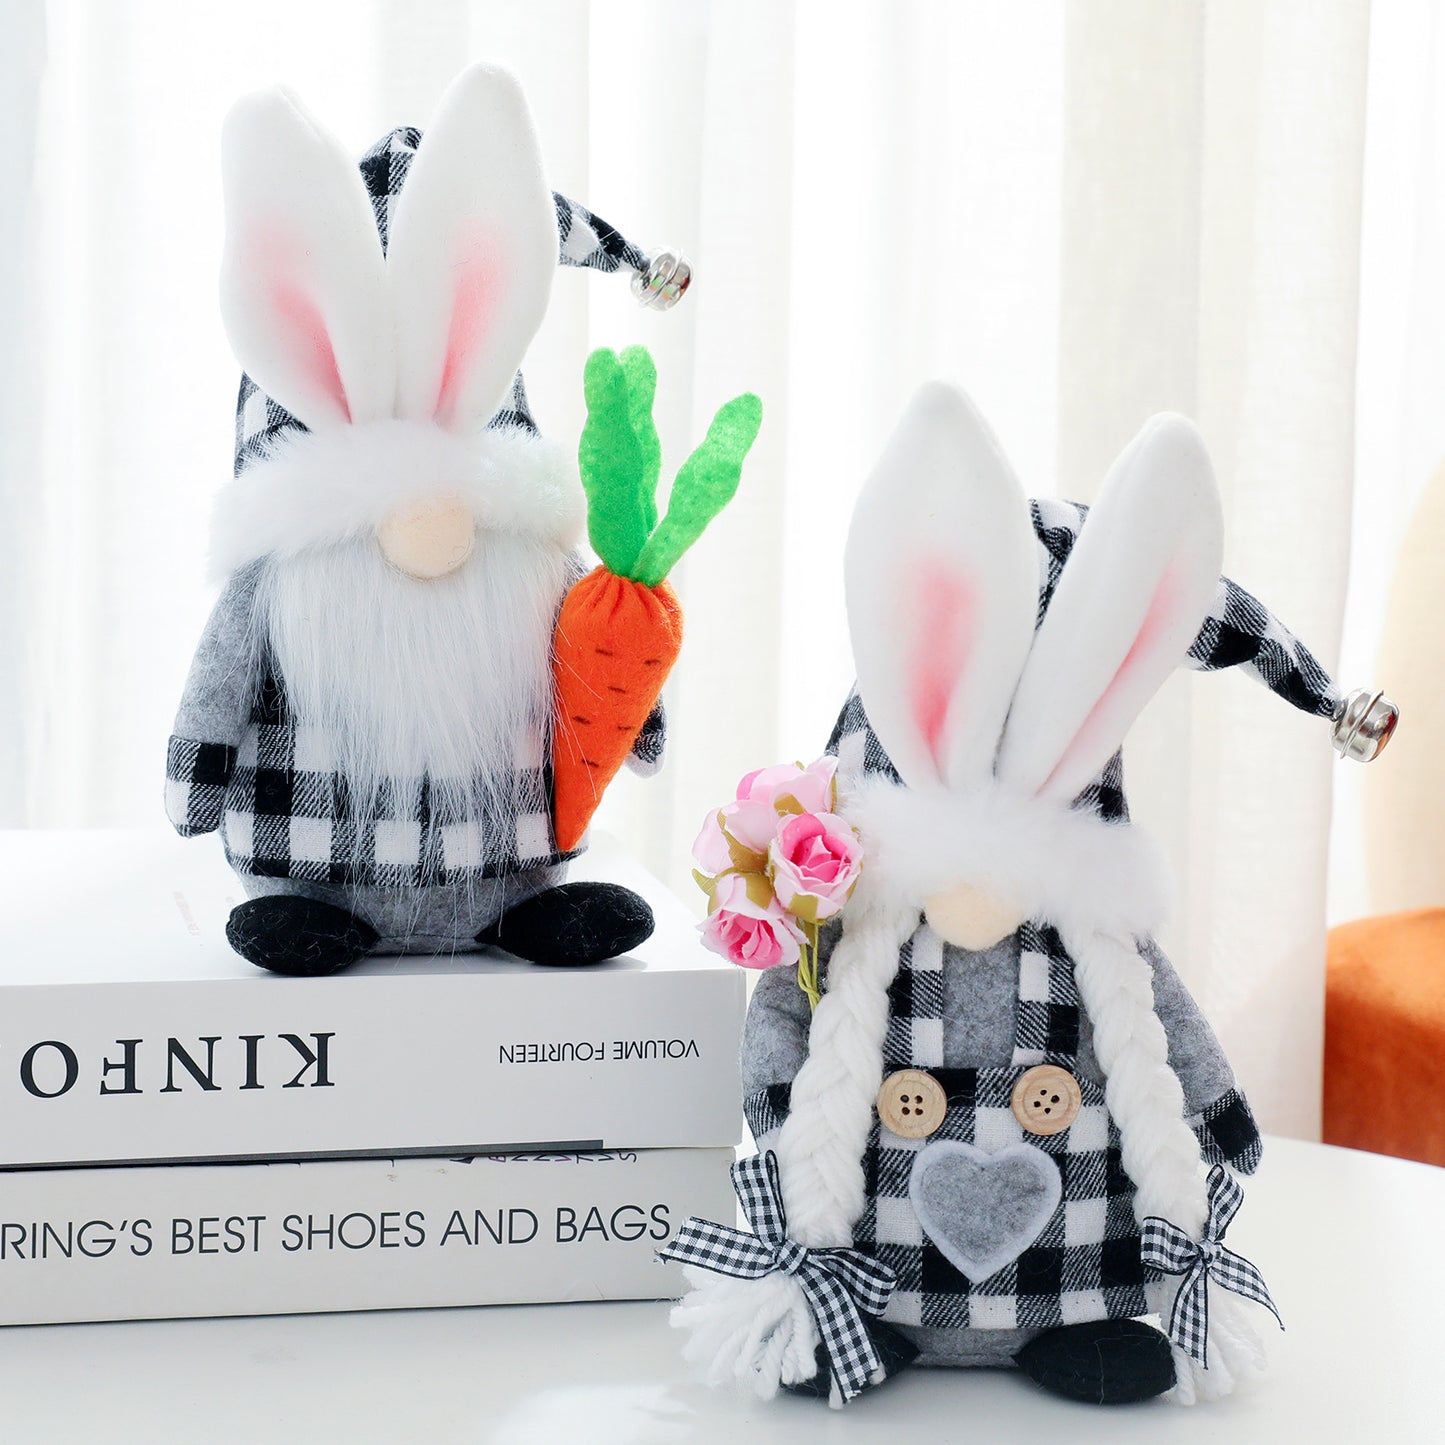 Easter Black and White Plaid Gnome